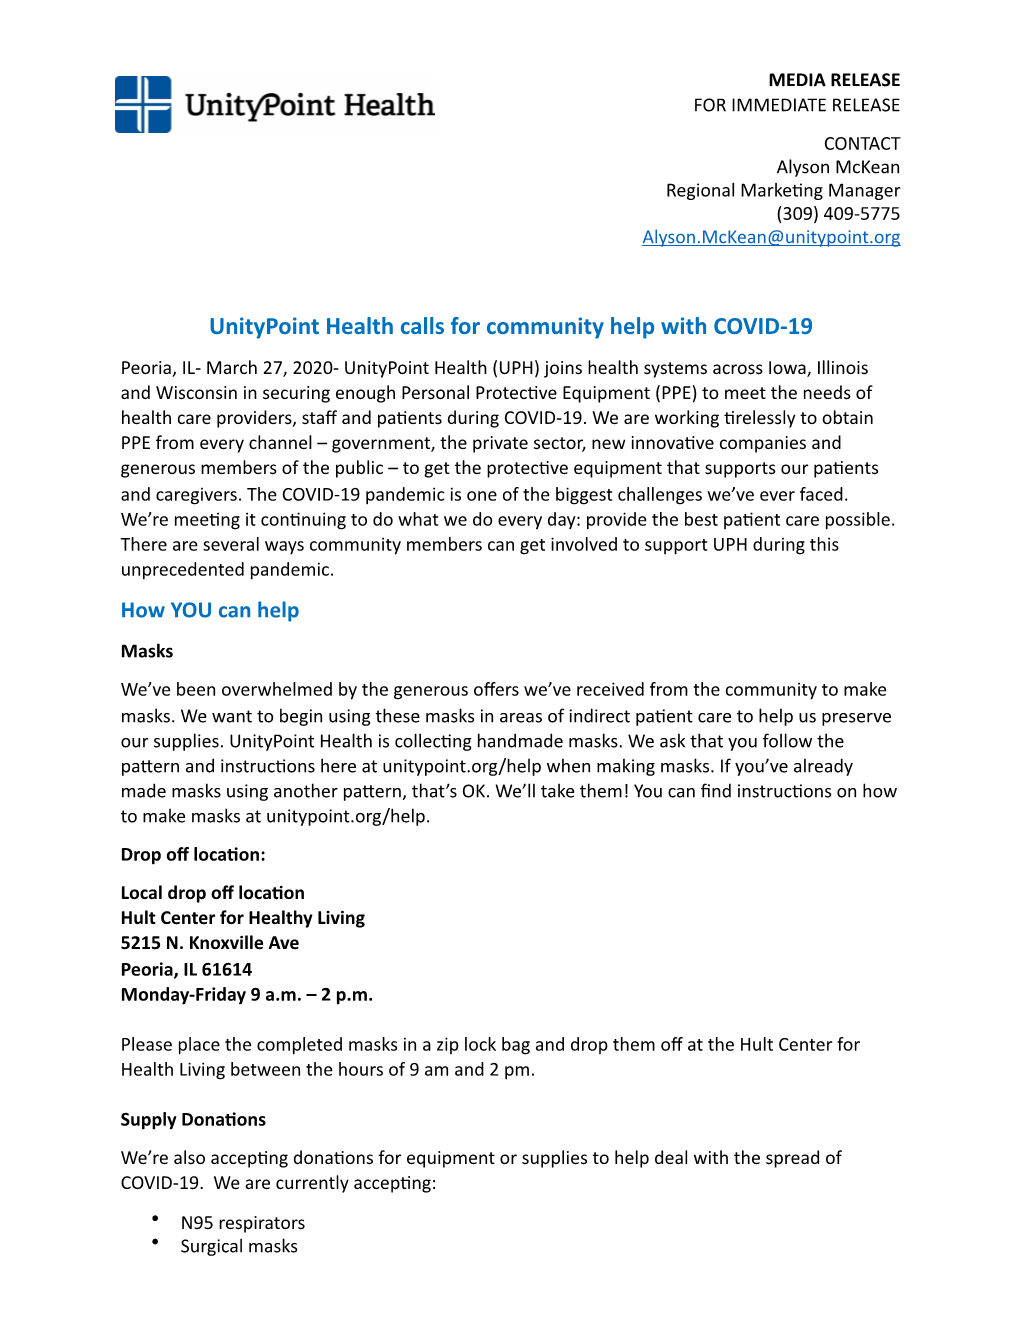 Unitypoint Health Calls for Community Help with COVID-19